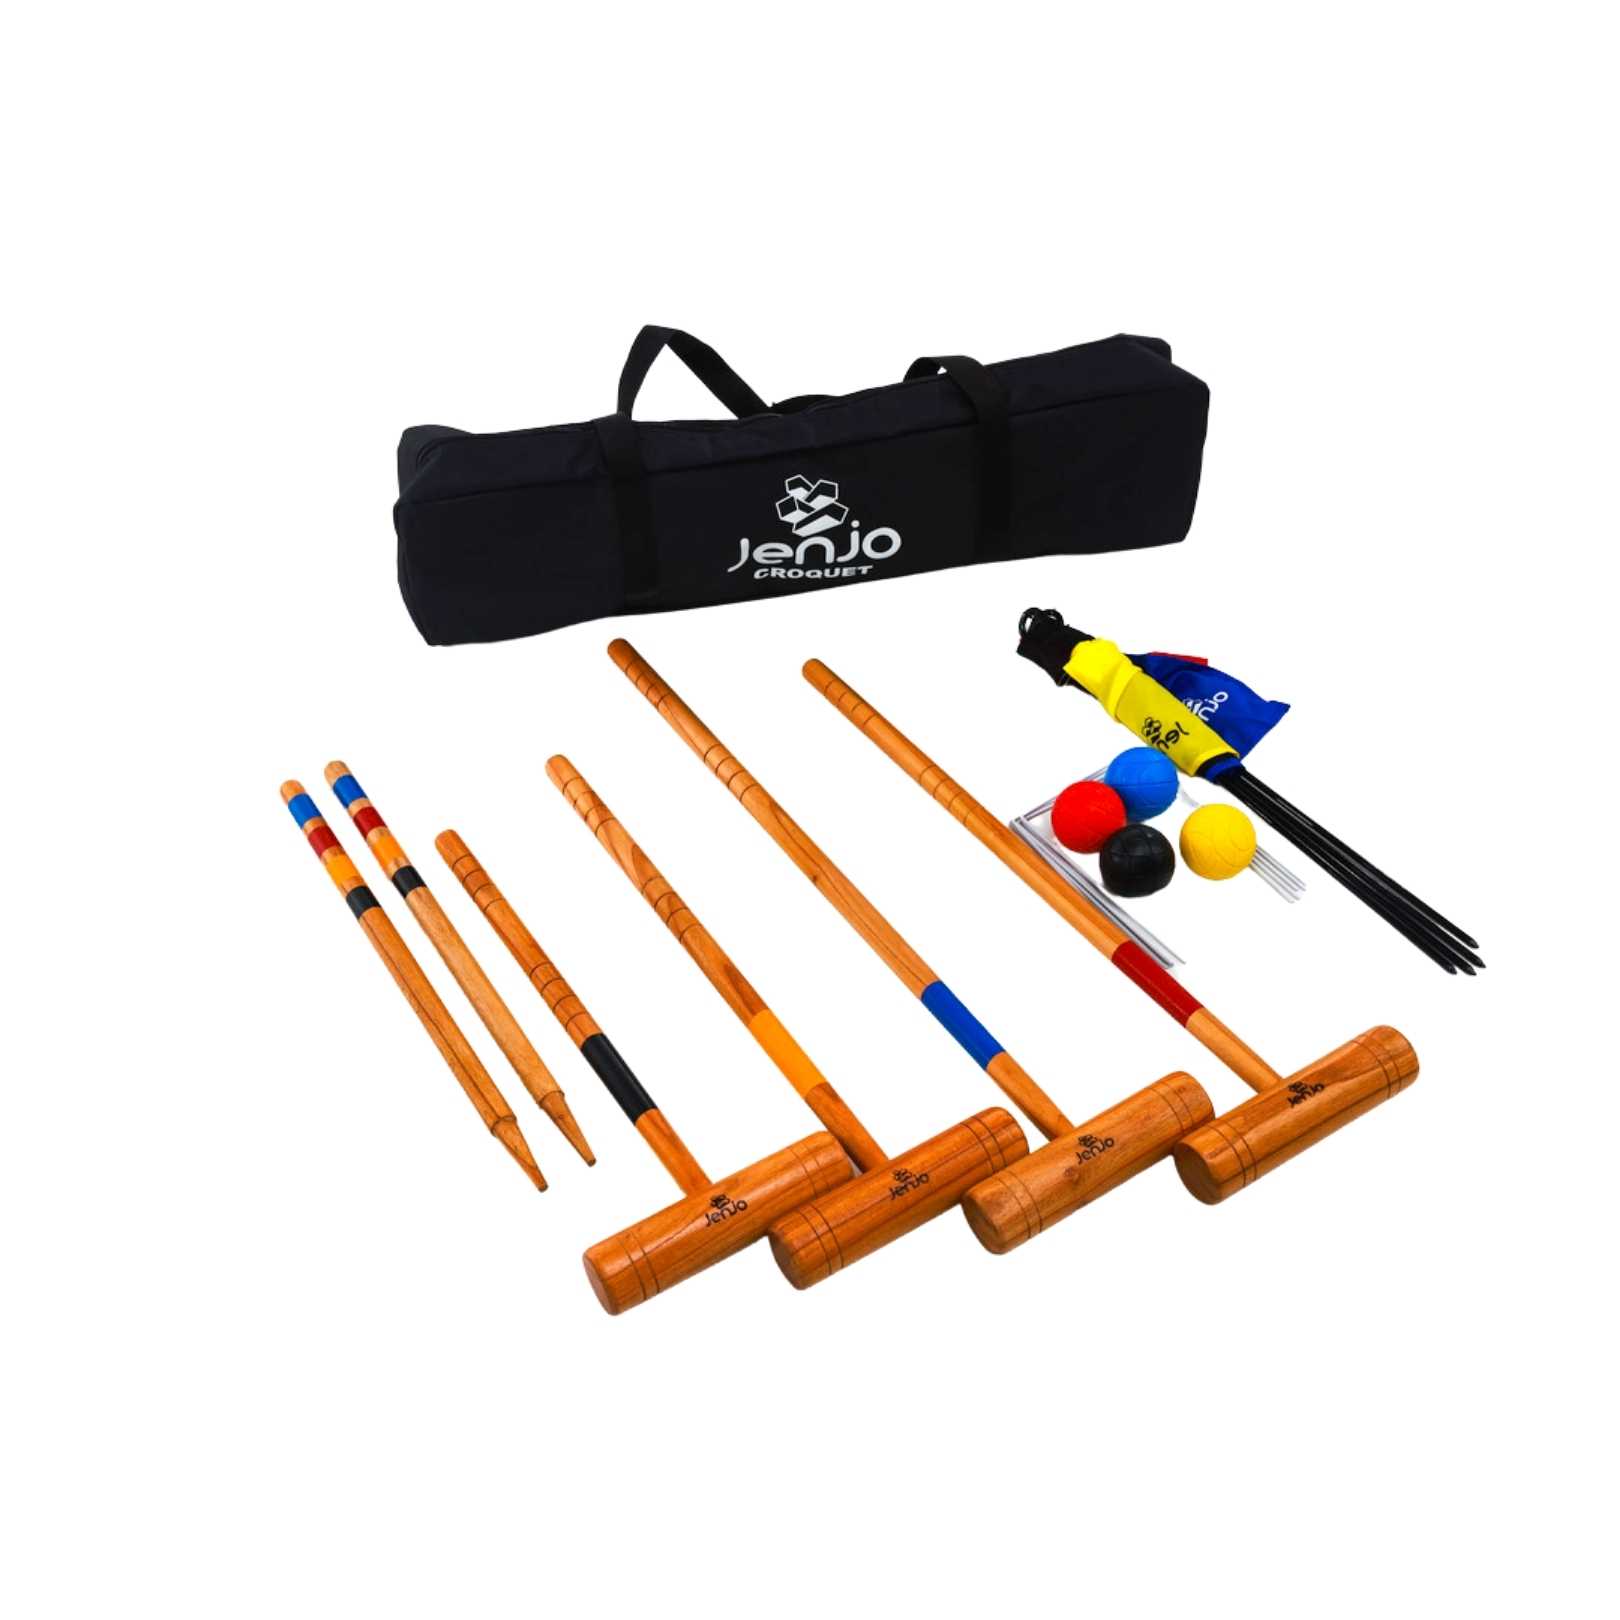 Outdoor Family Hardwood Croquet Ball Mallet Game 4 Player Set